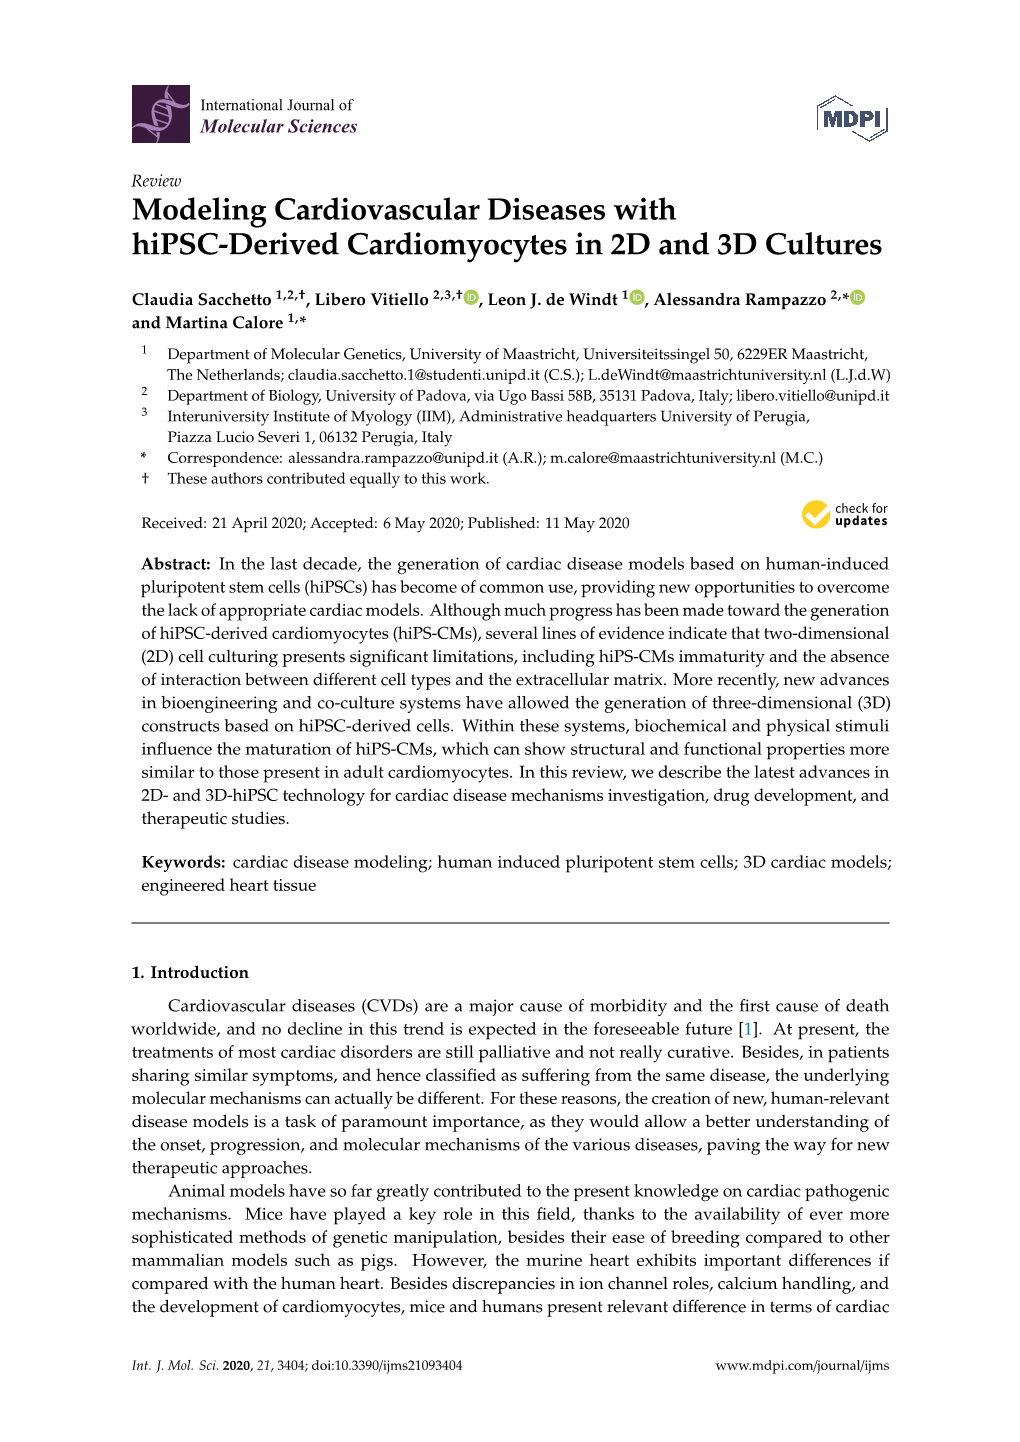 Modeling Cardiovascular Diseases with Hipsc-Derived Cardiomyocytes in 2D and 3D Cultures